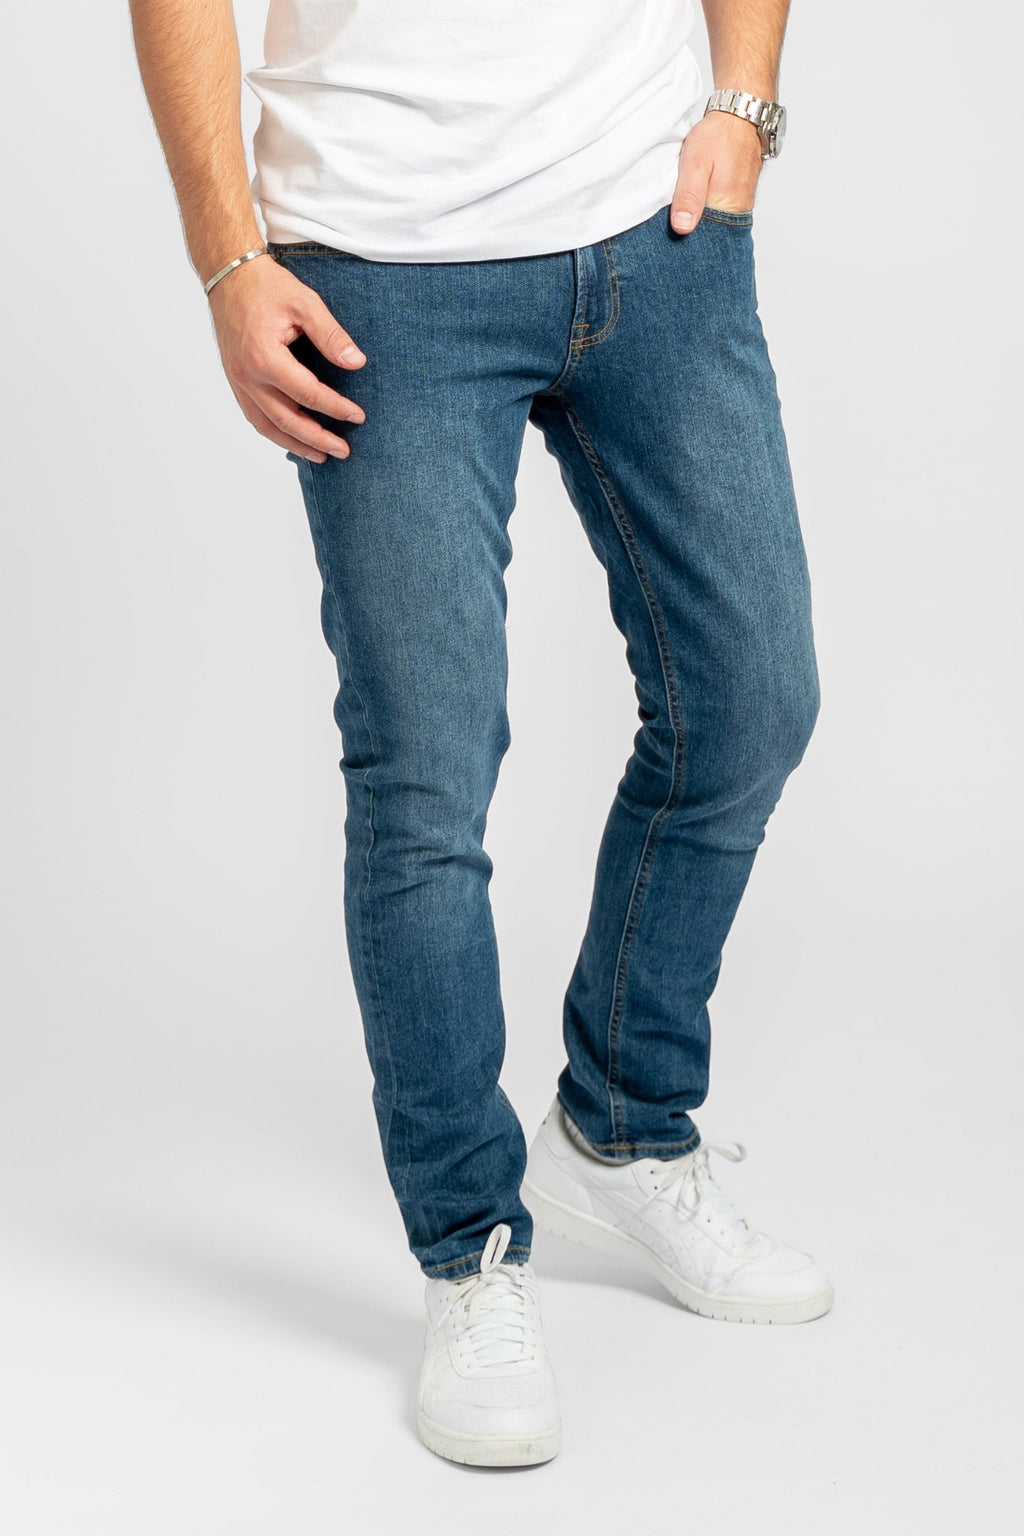 The Original Performance Jeans™️ (Slim) - Package Deal (FB)